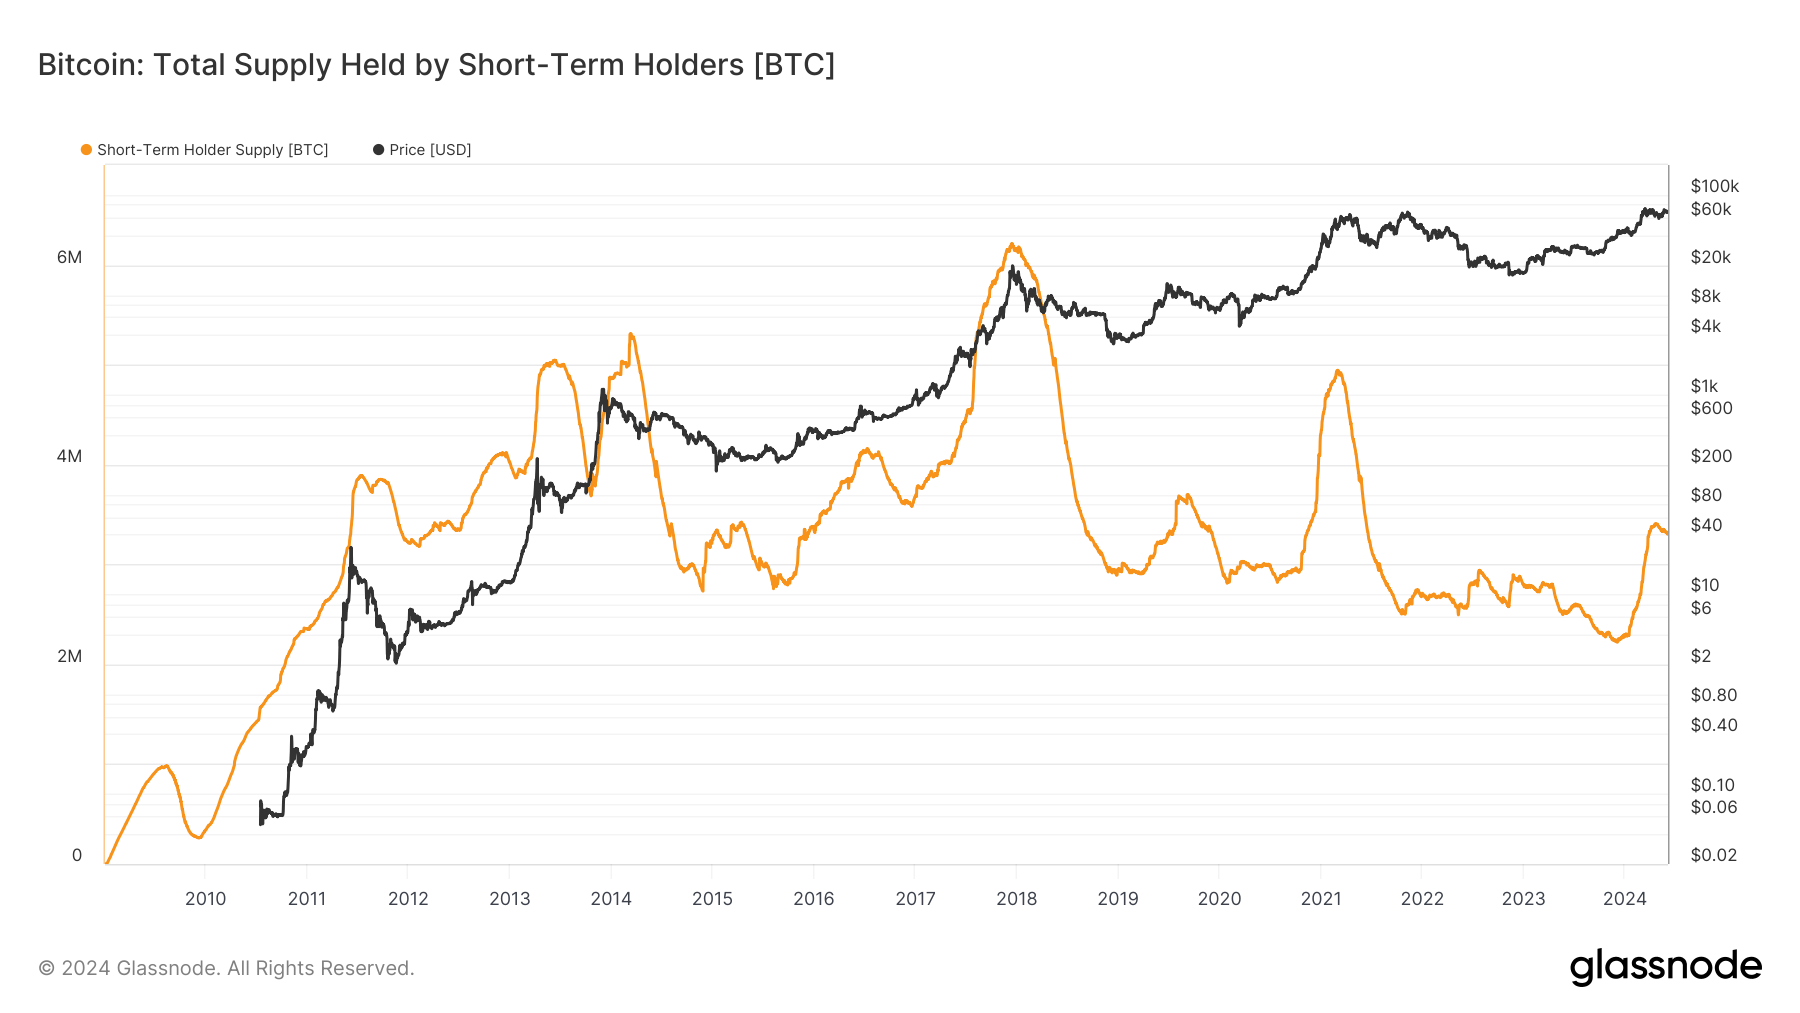 Bitcoin short-term holders increased holdings by over 1 million BTC in six months